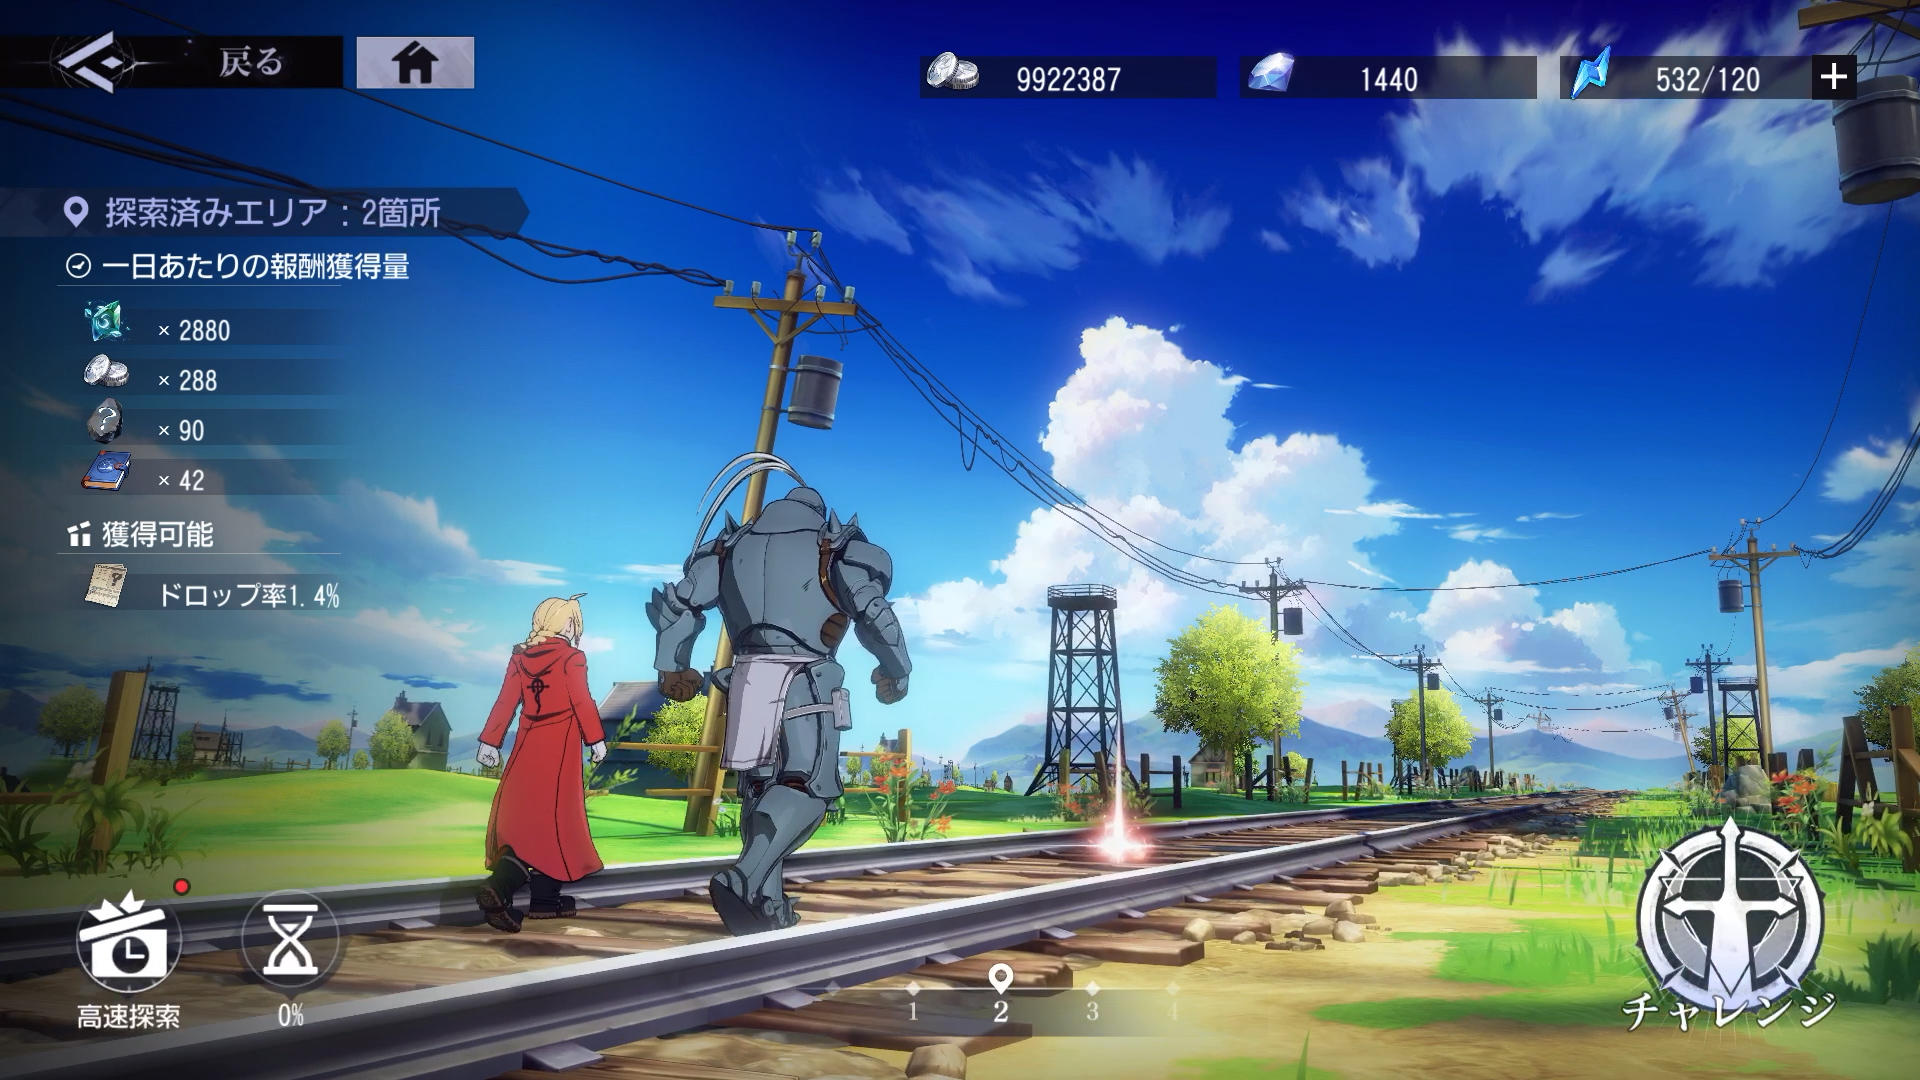 Fullmetal Alchemist' is getting a mobile game in 2022